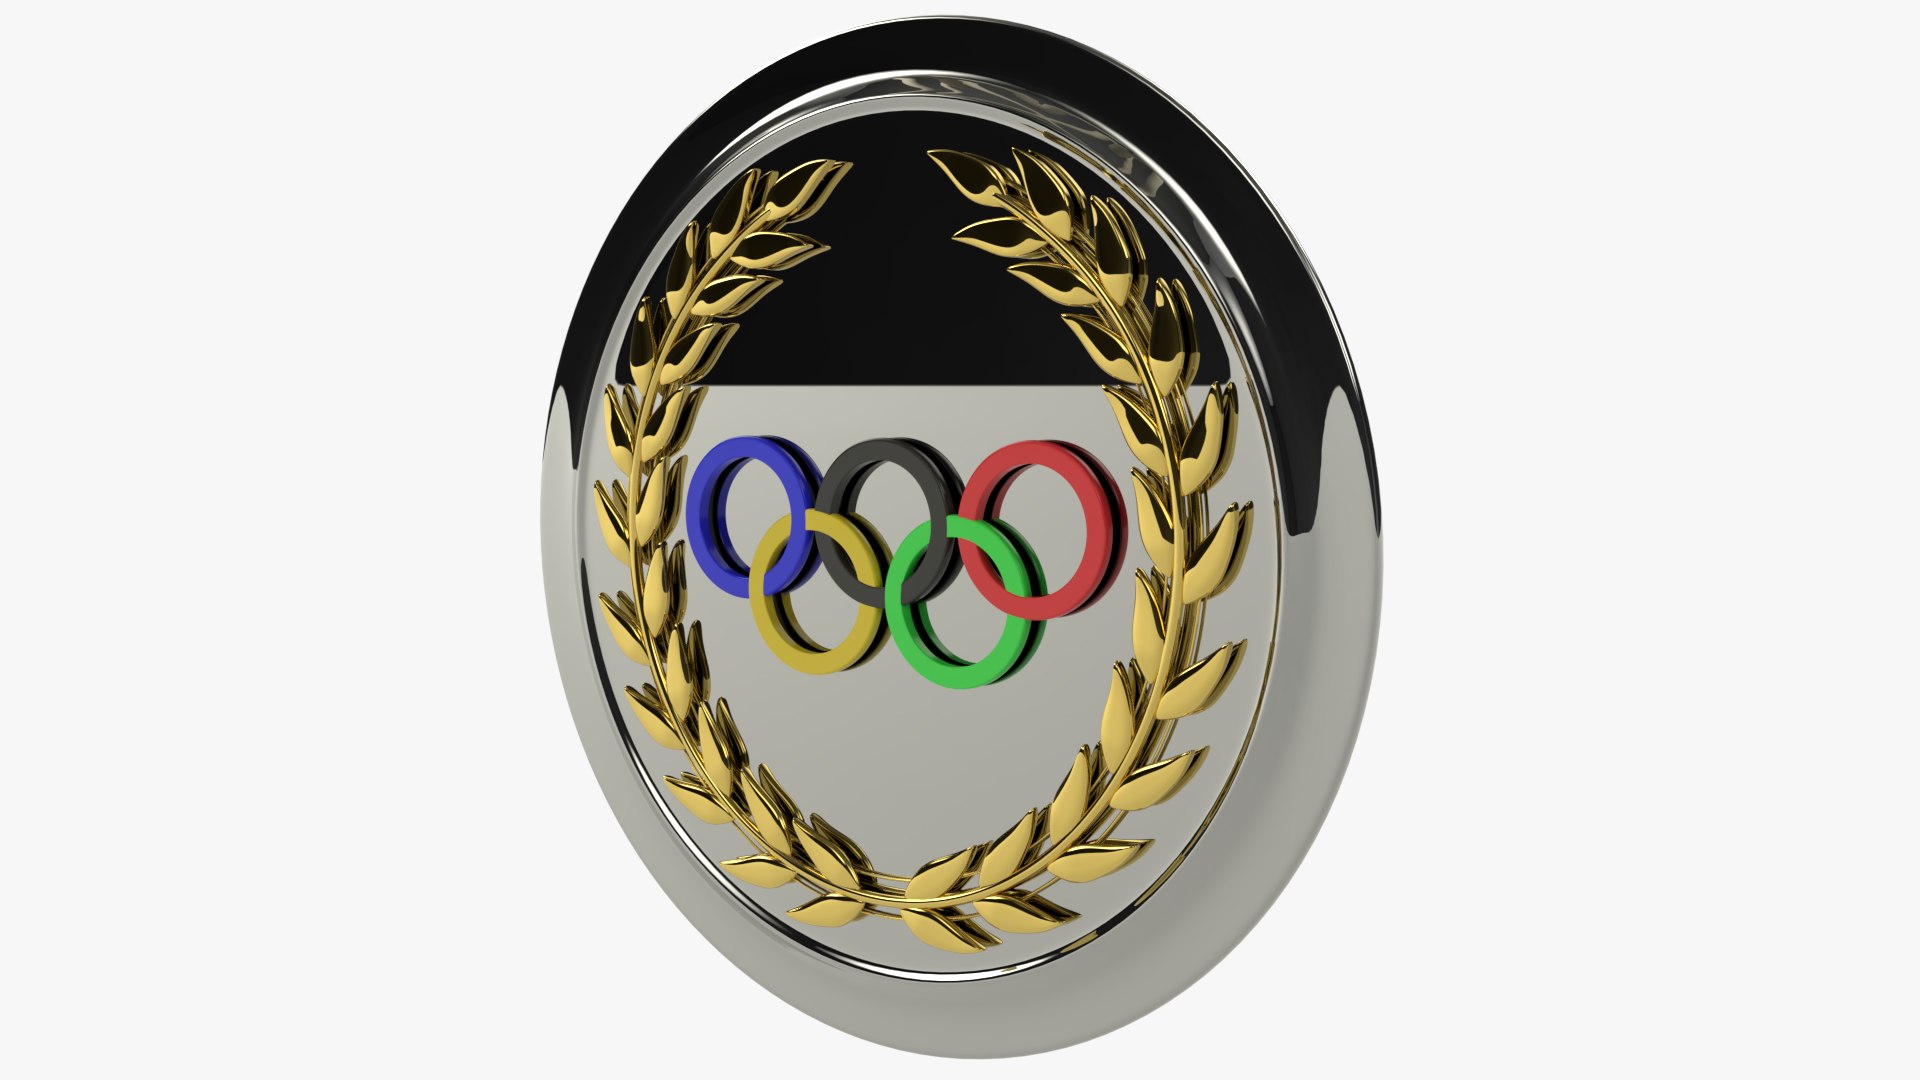 USA OLYMPIC GAMES PIN LAPEL GOLD TONE OLYMPIC RINGS | eBay